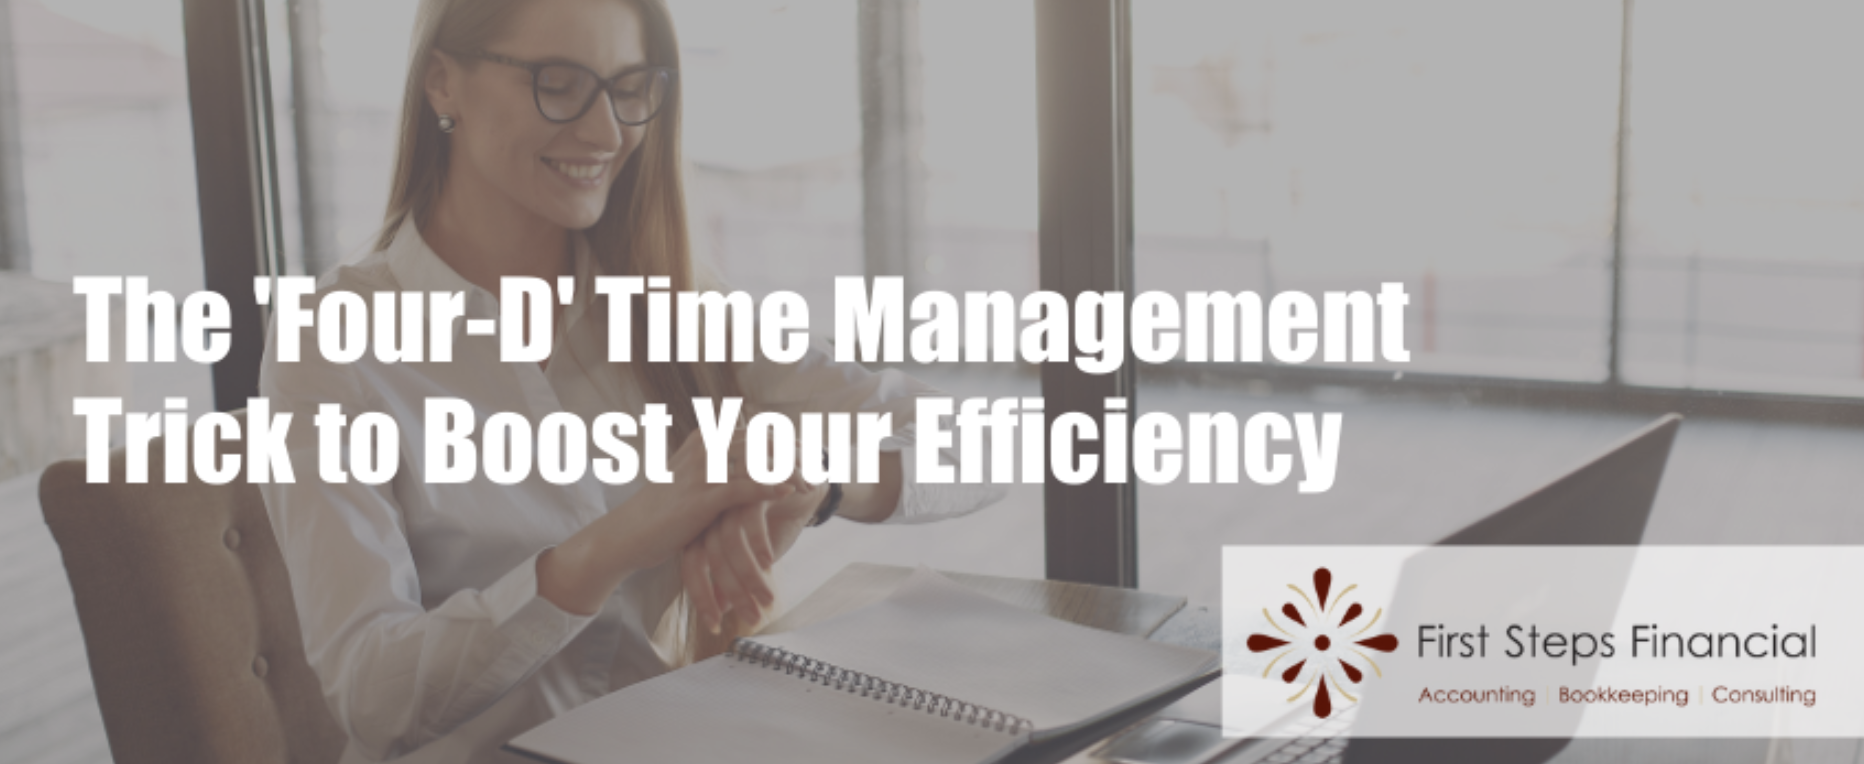 The ‘Four-D’ Time Management Trick to Boost Your Efficiency